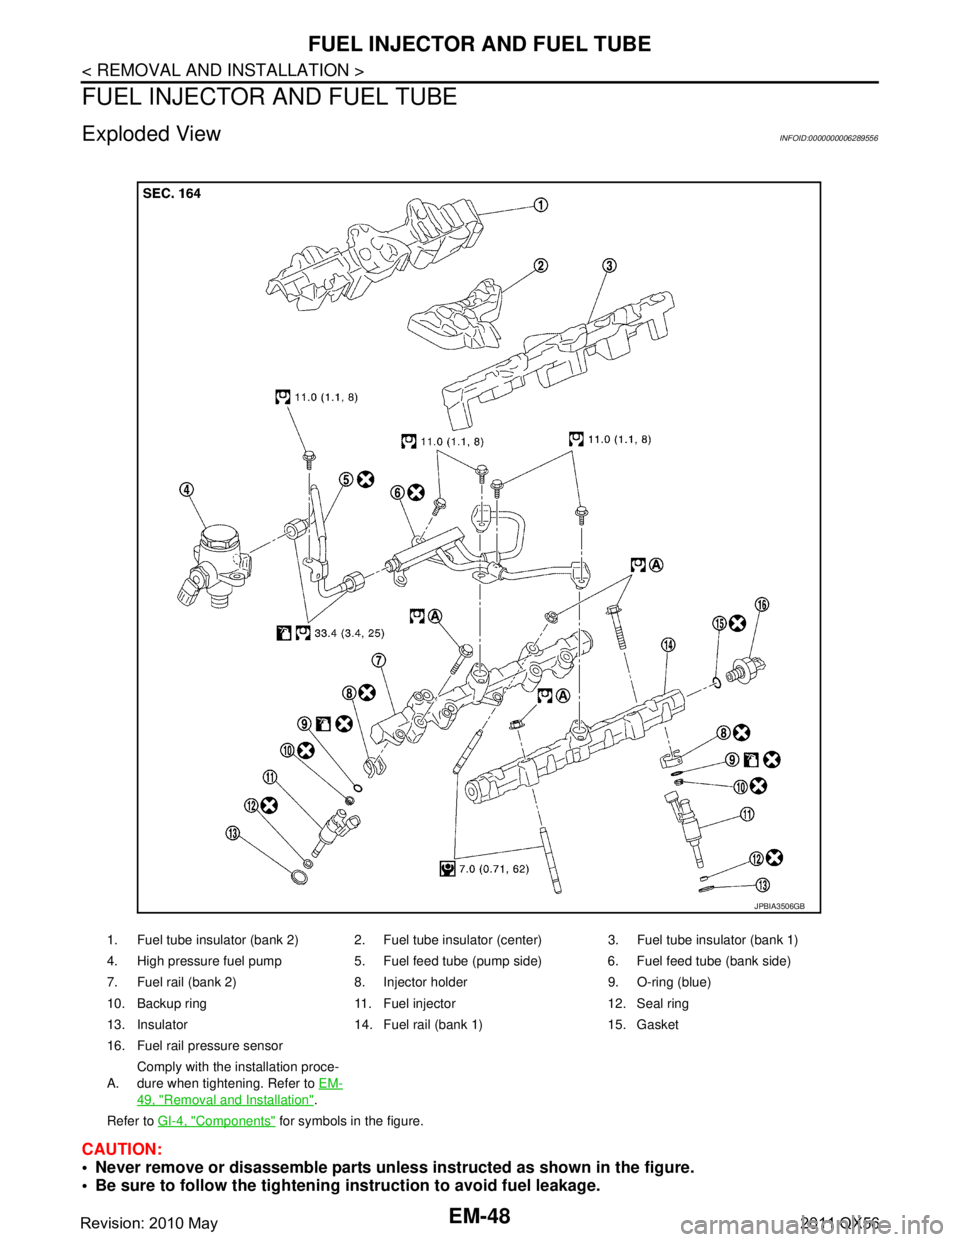 INFINITI QX56 2011  Factory Service Manual 
EM-48
< REMOVAL AND INSTALLATION >
FUEL INJECTOR AND FUEL TUBE
FUEL INJECTOR AND FUEL TUBE
Exploded ViewINFOID:0000000006289556
CAUTION:
 Never remove or disassemble parts unless instructed as shown